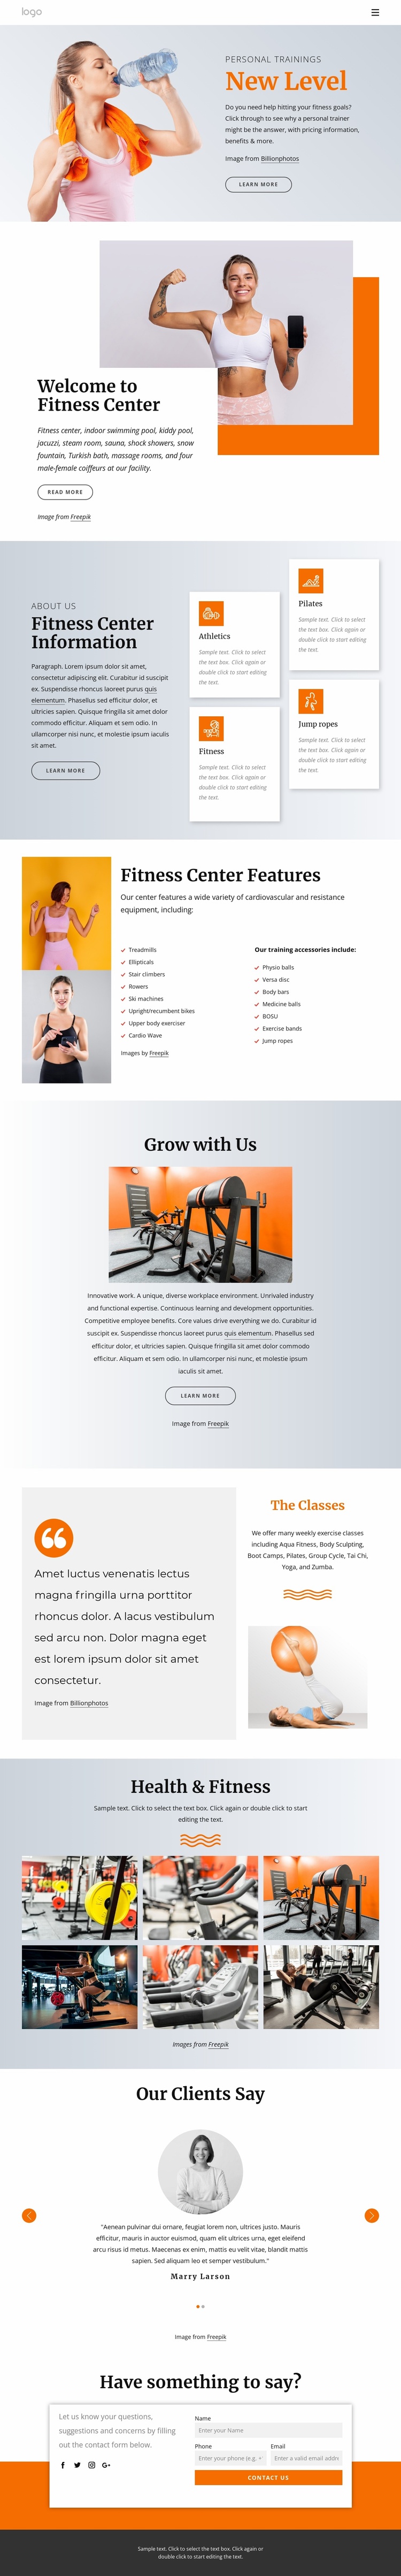 24 hour fitness center eCommerce Template